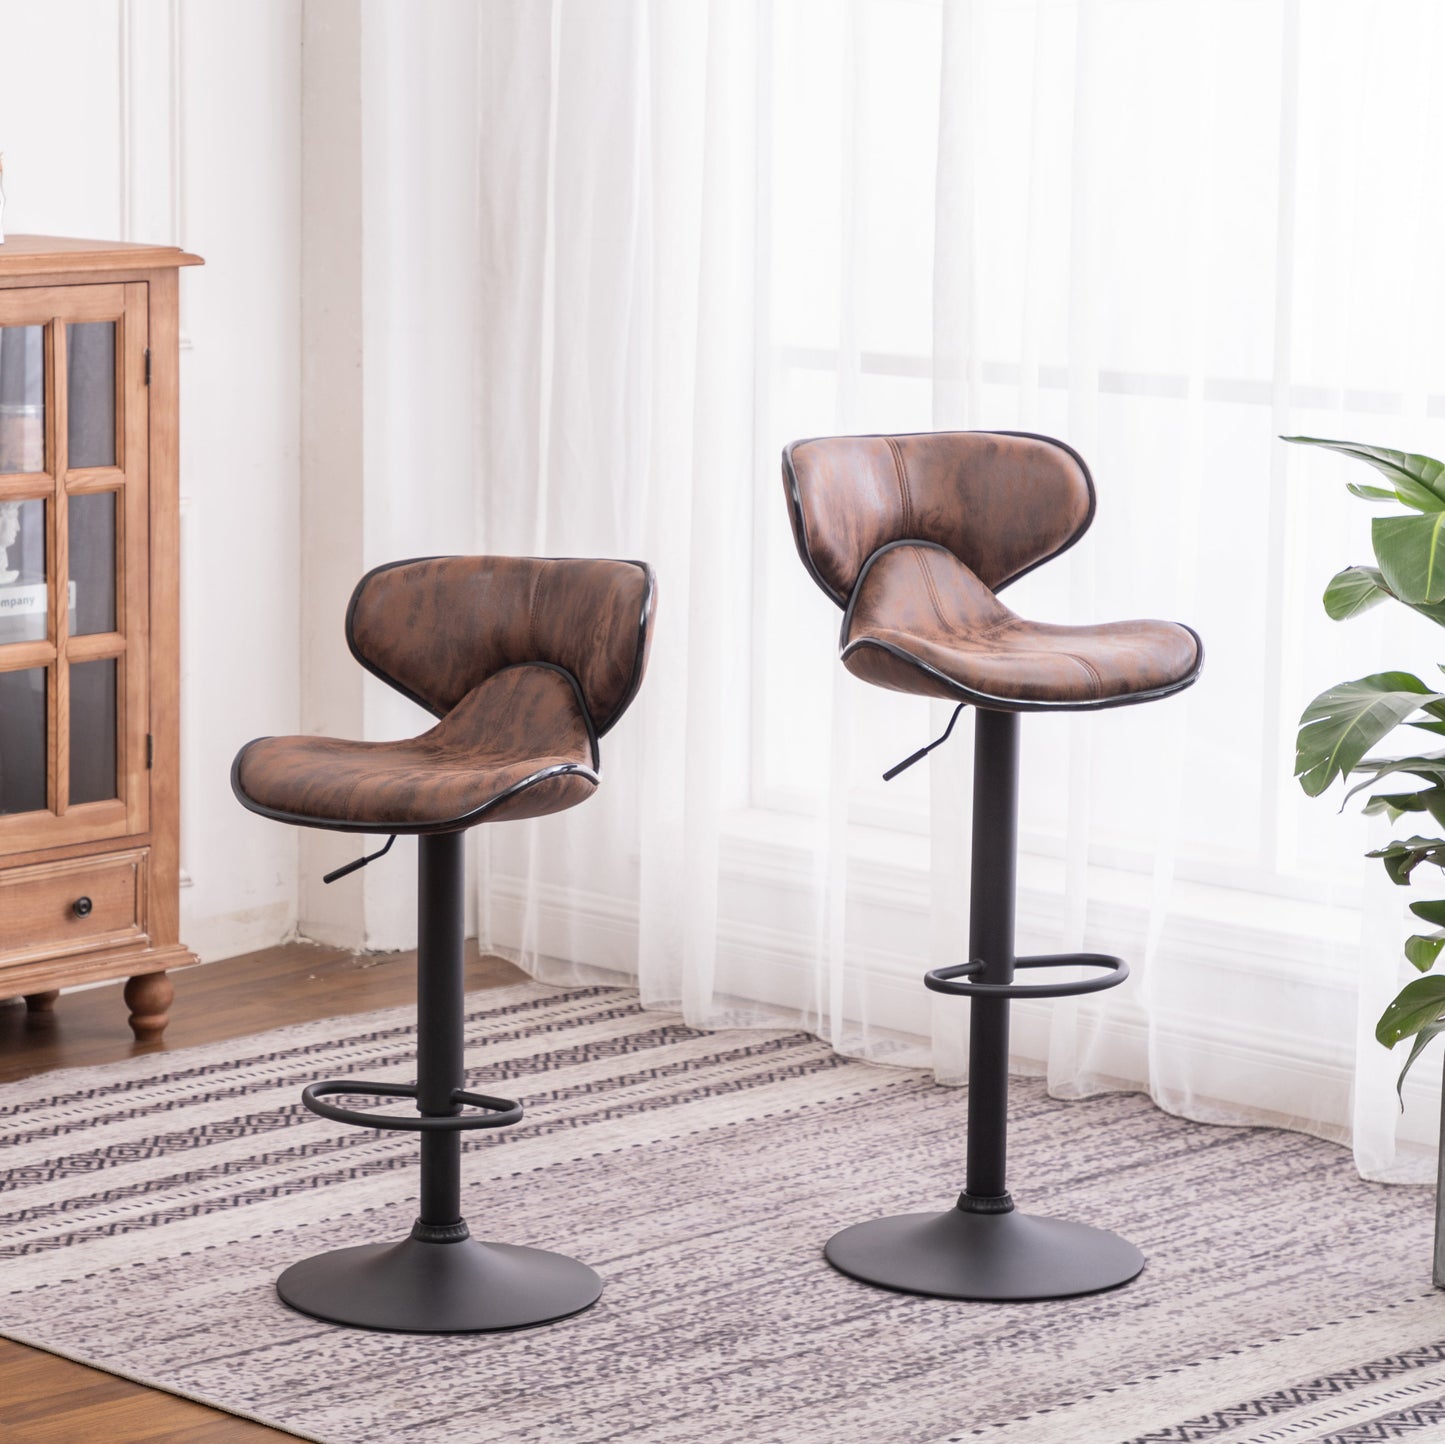 Masaccio Weathered Upholstery Airlift Adjustable Swivel Barstool with Chrome Base, Set of 2, Brown